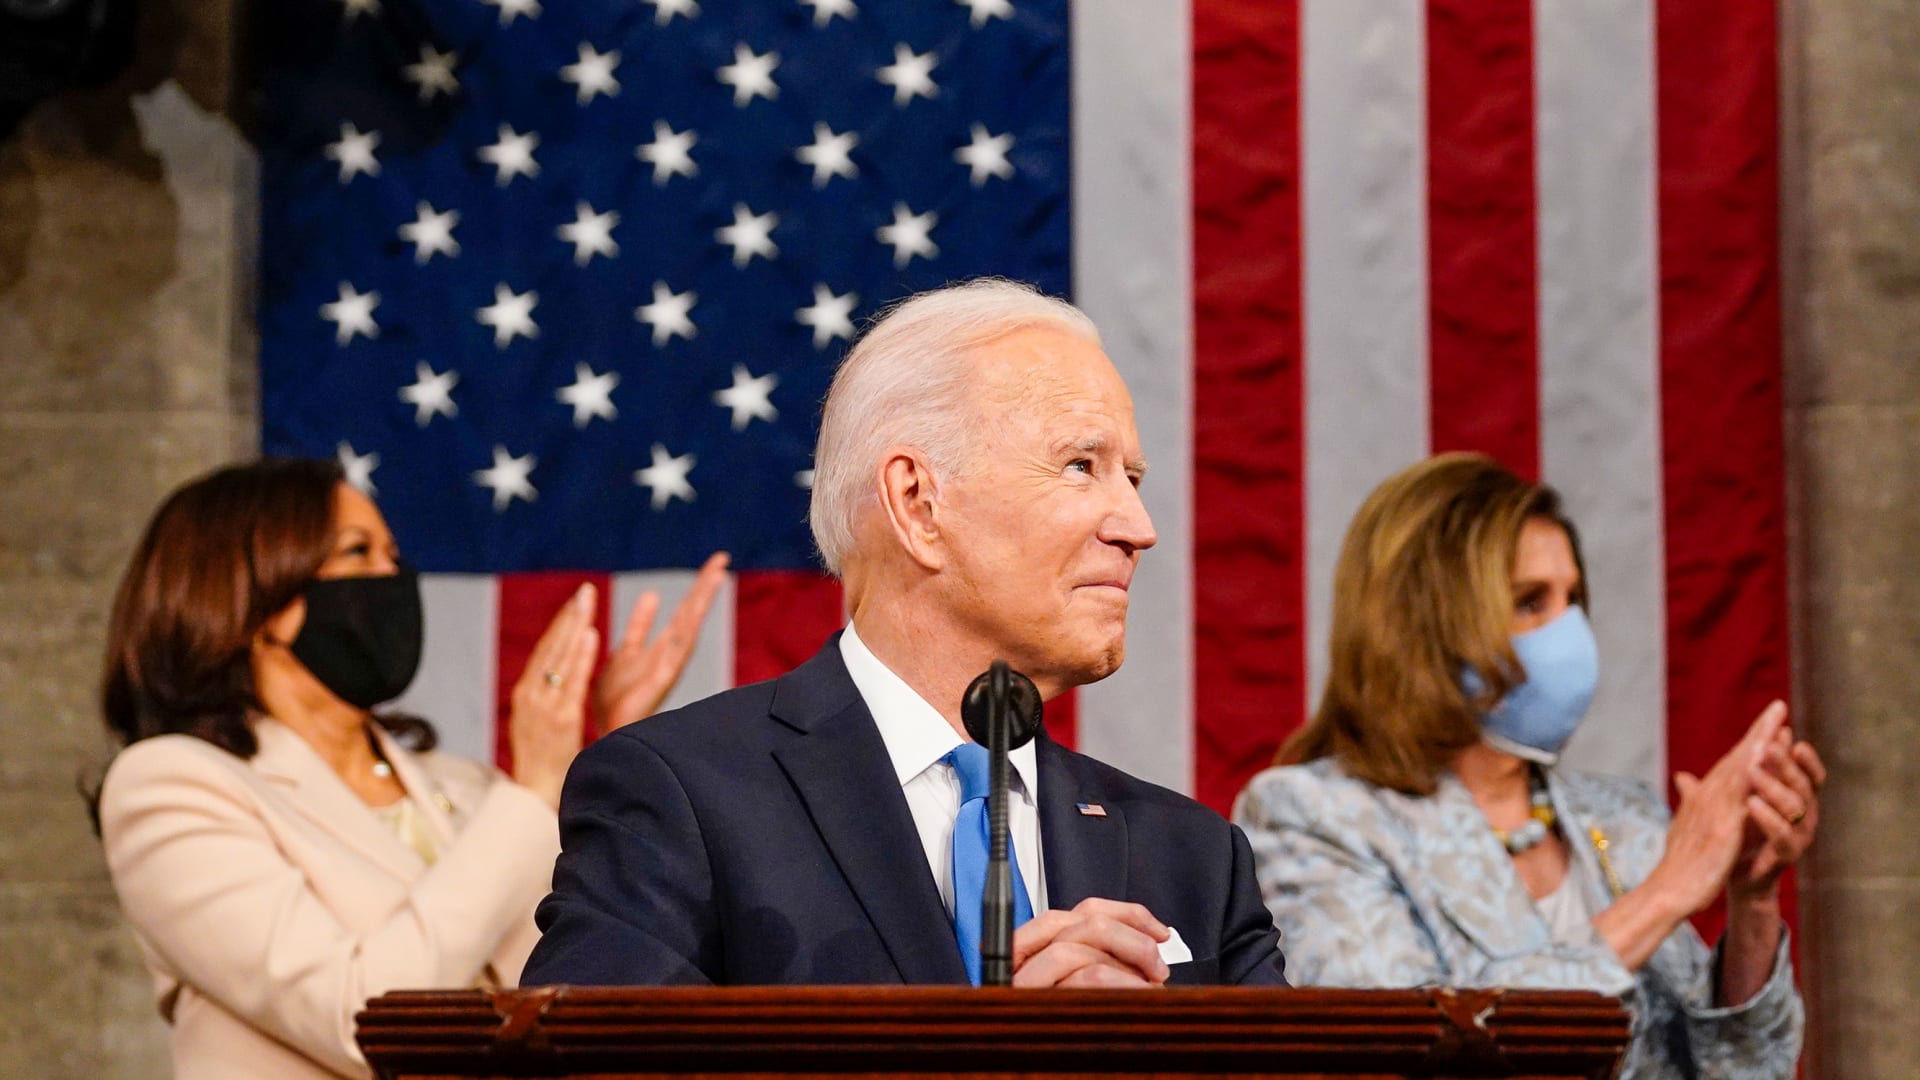 The 4 Priorities Small Businesses Want to Hear About During Biden's First State of the Union Address